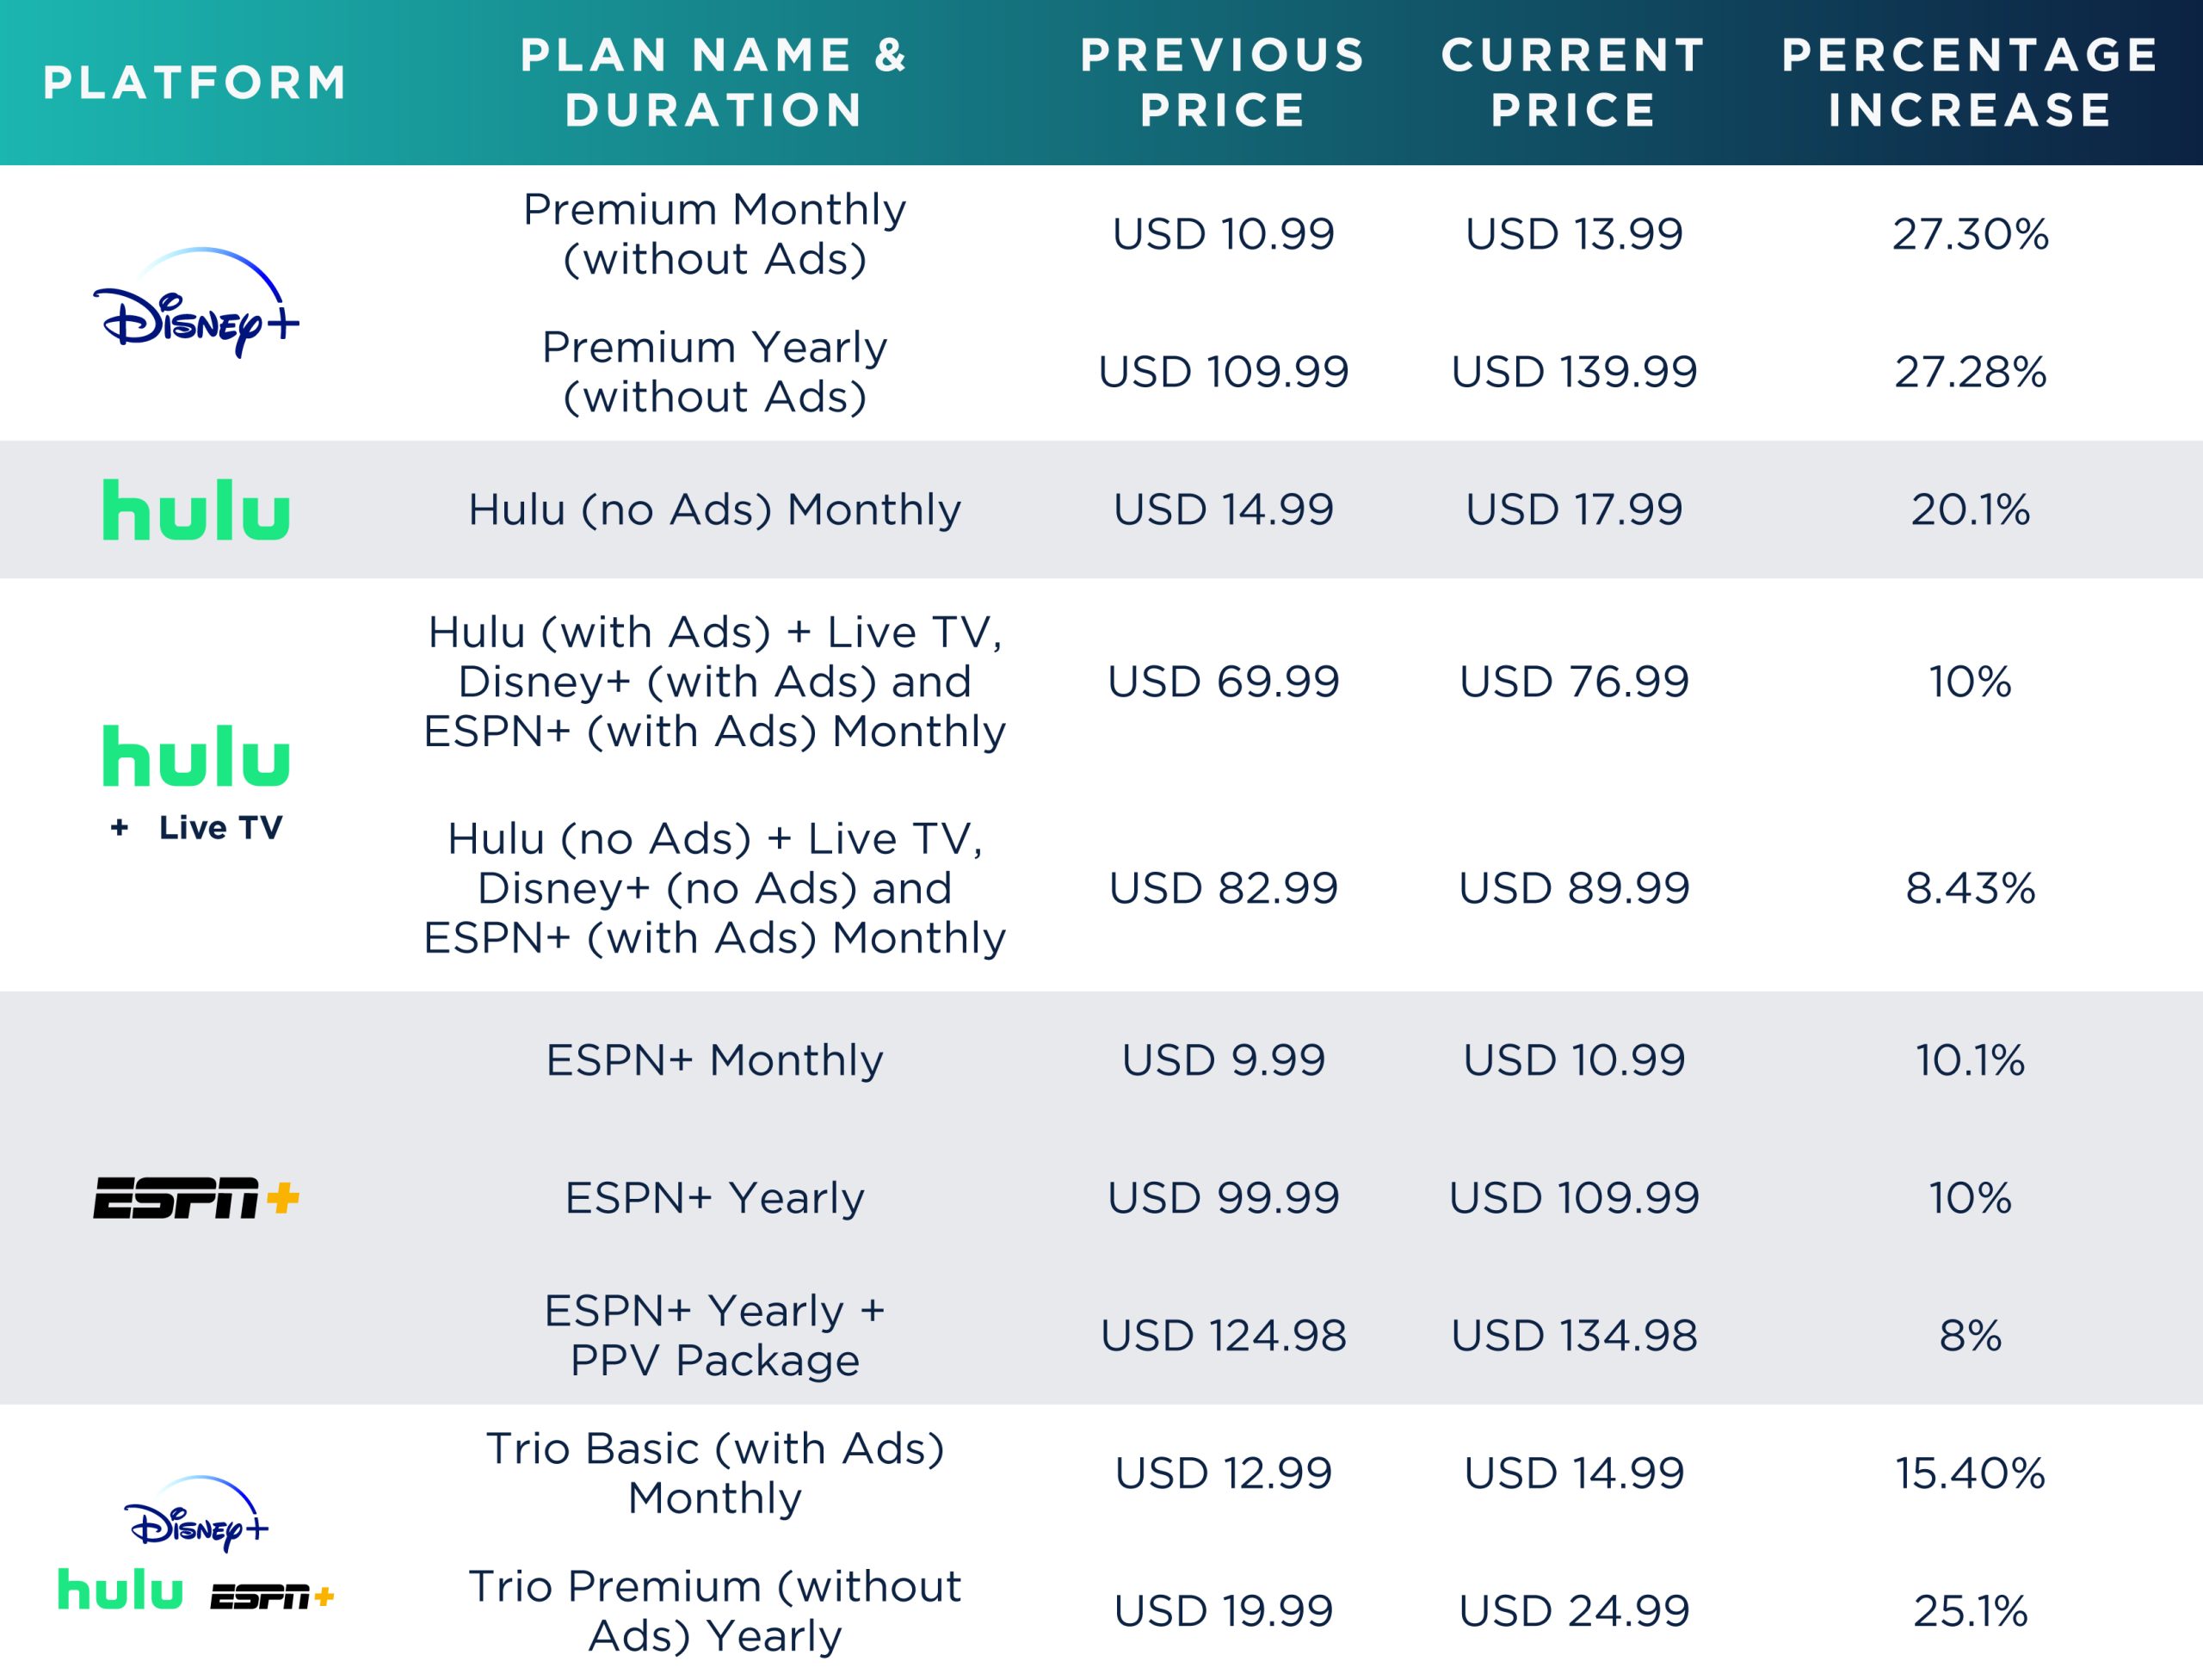 Prime Video Channels — What It Is, How Much It Costs